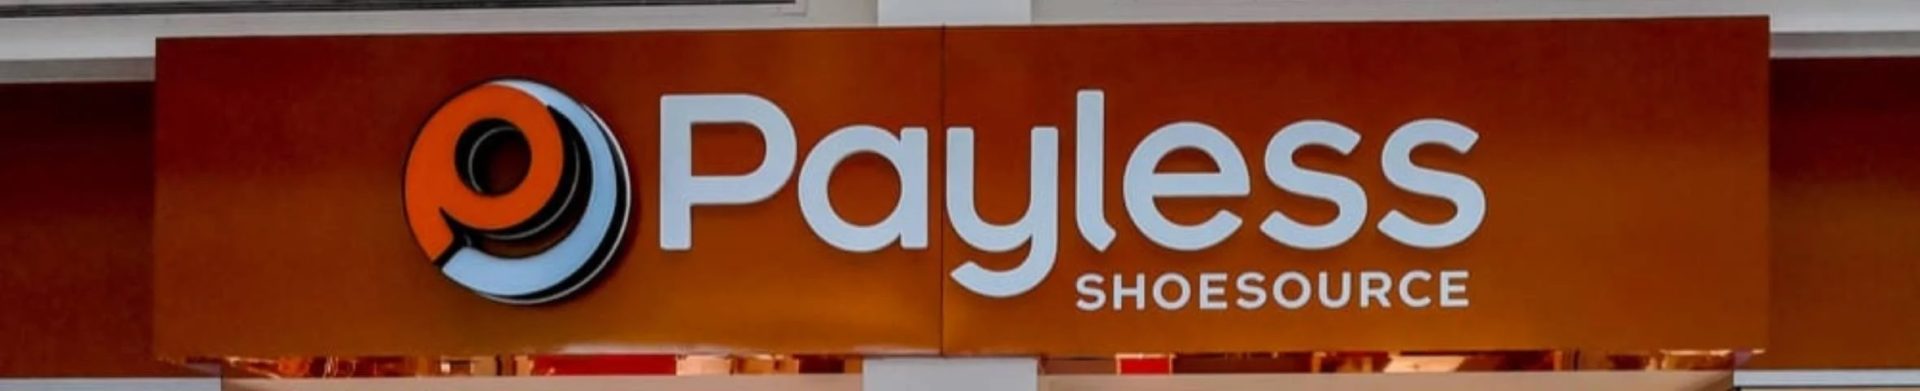 Payless storefront in the daytime